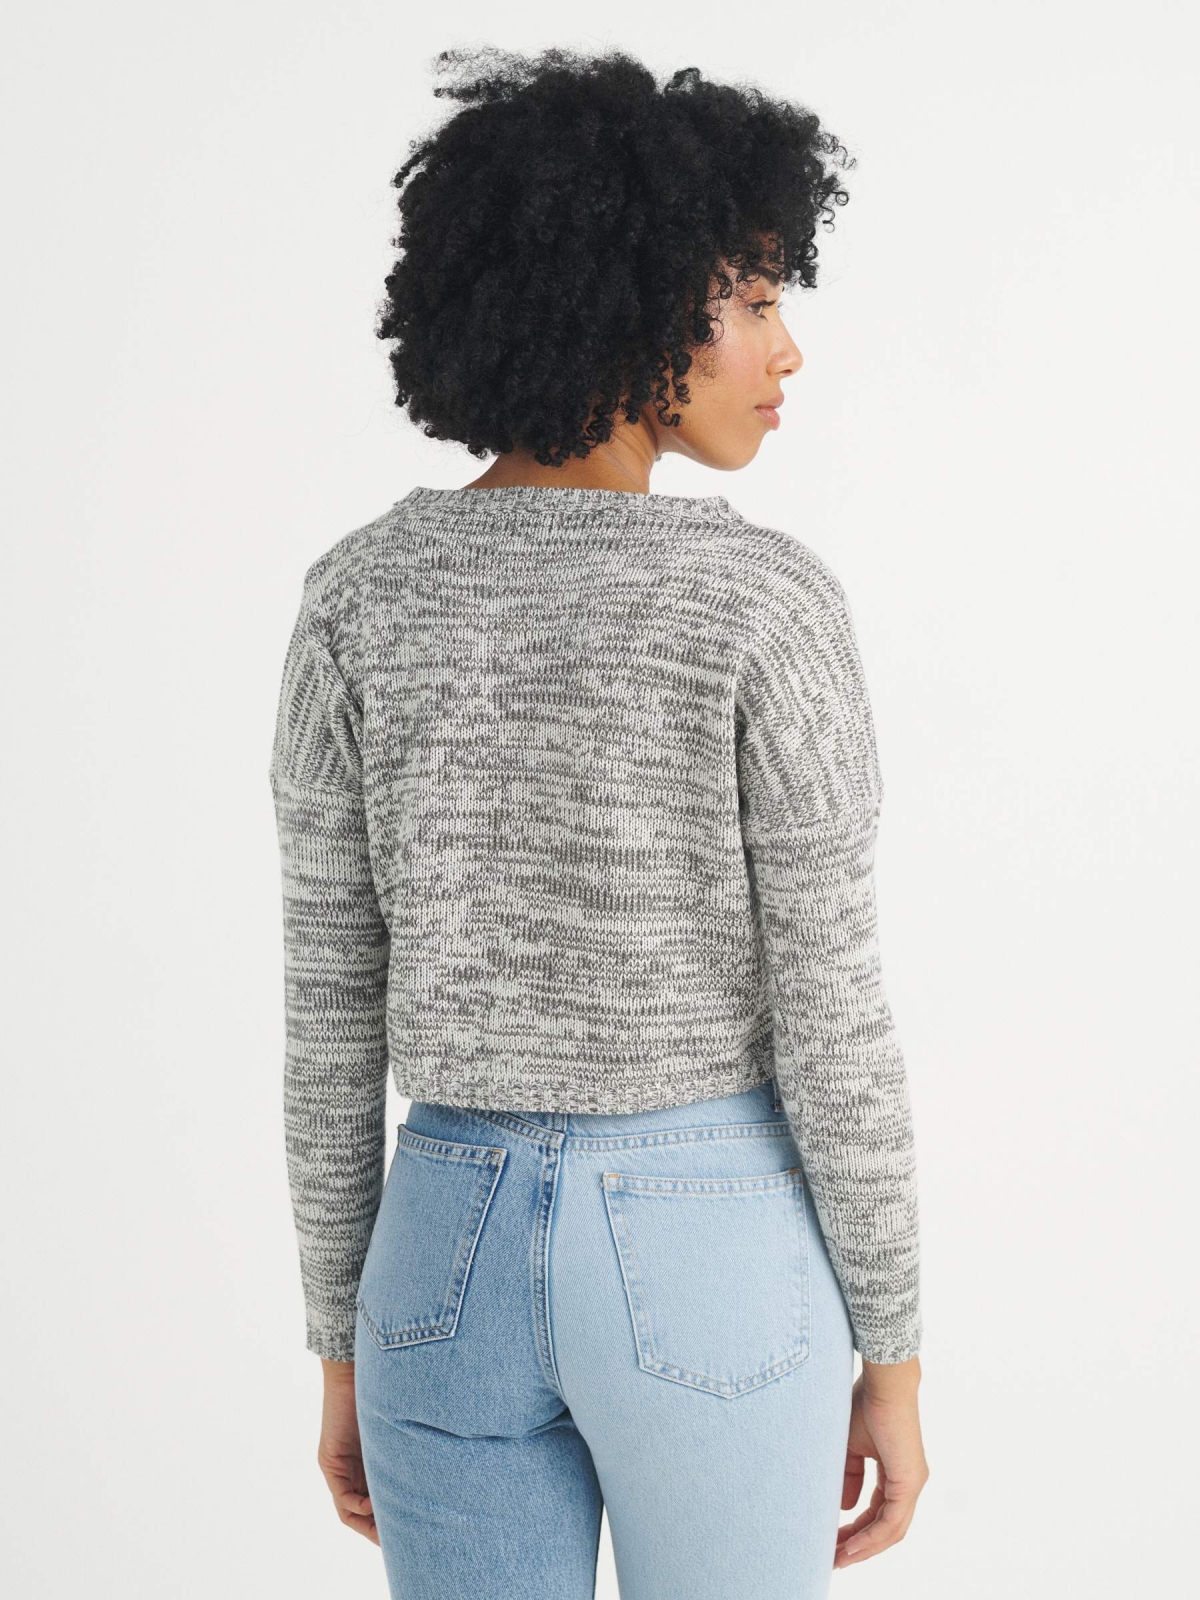 Heather cropped sweater off white middle back view